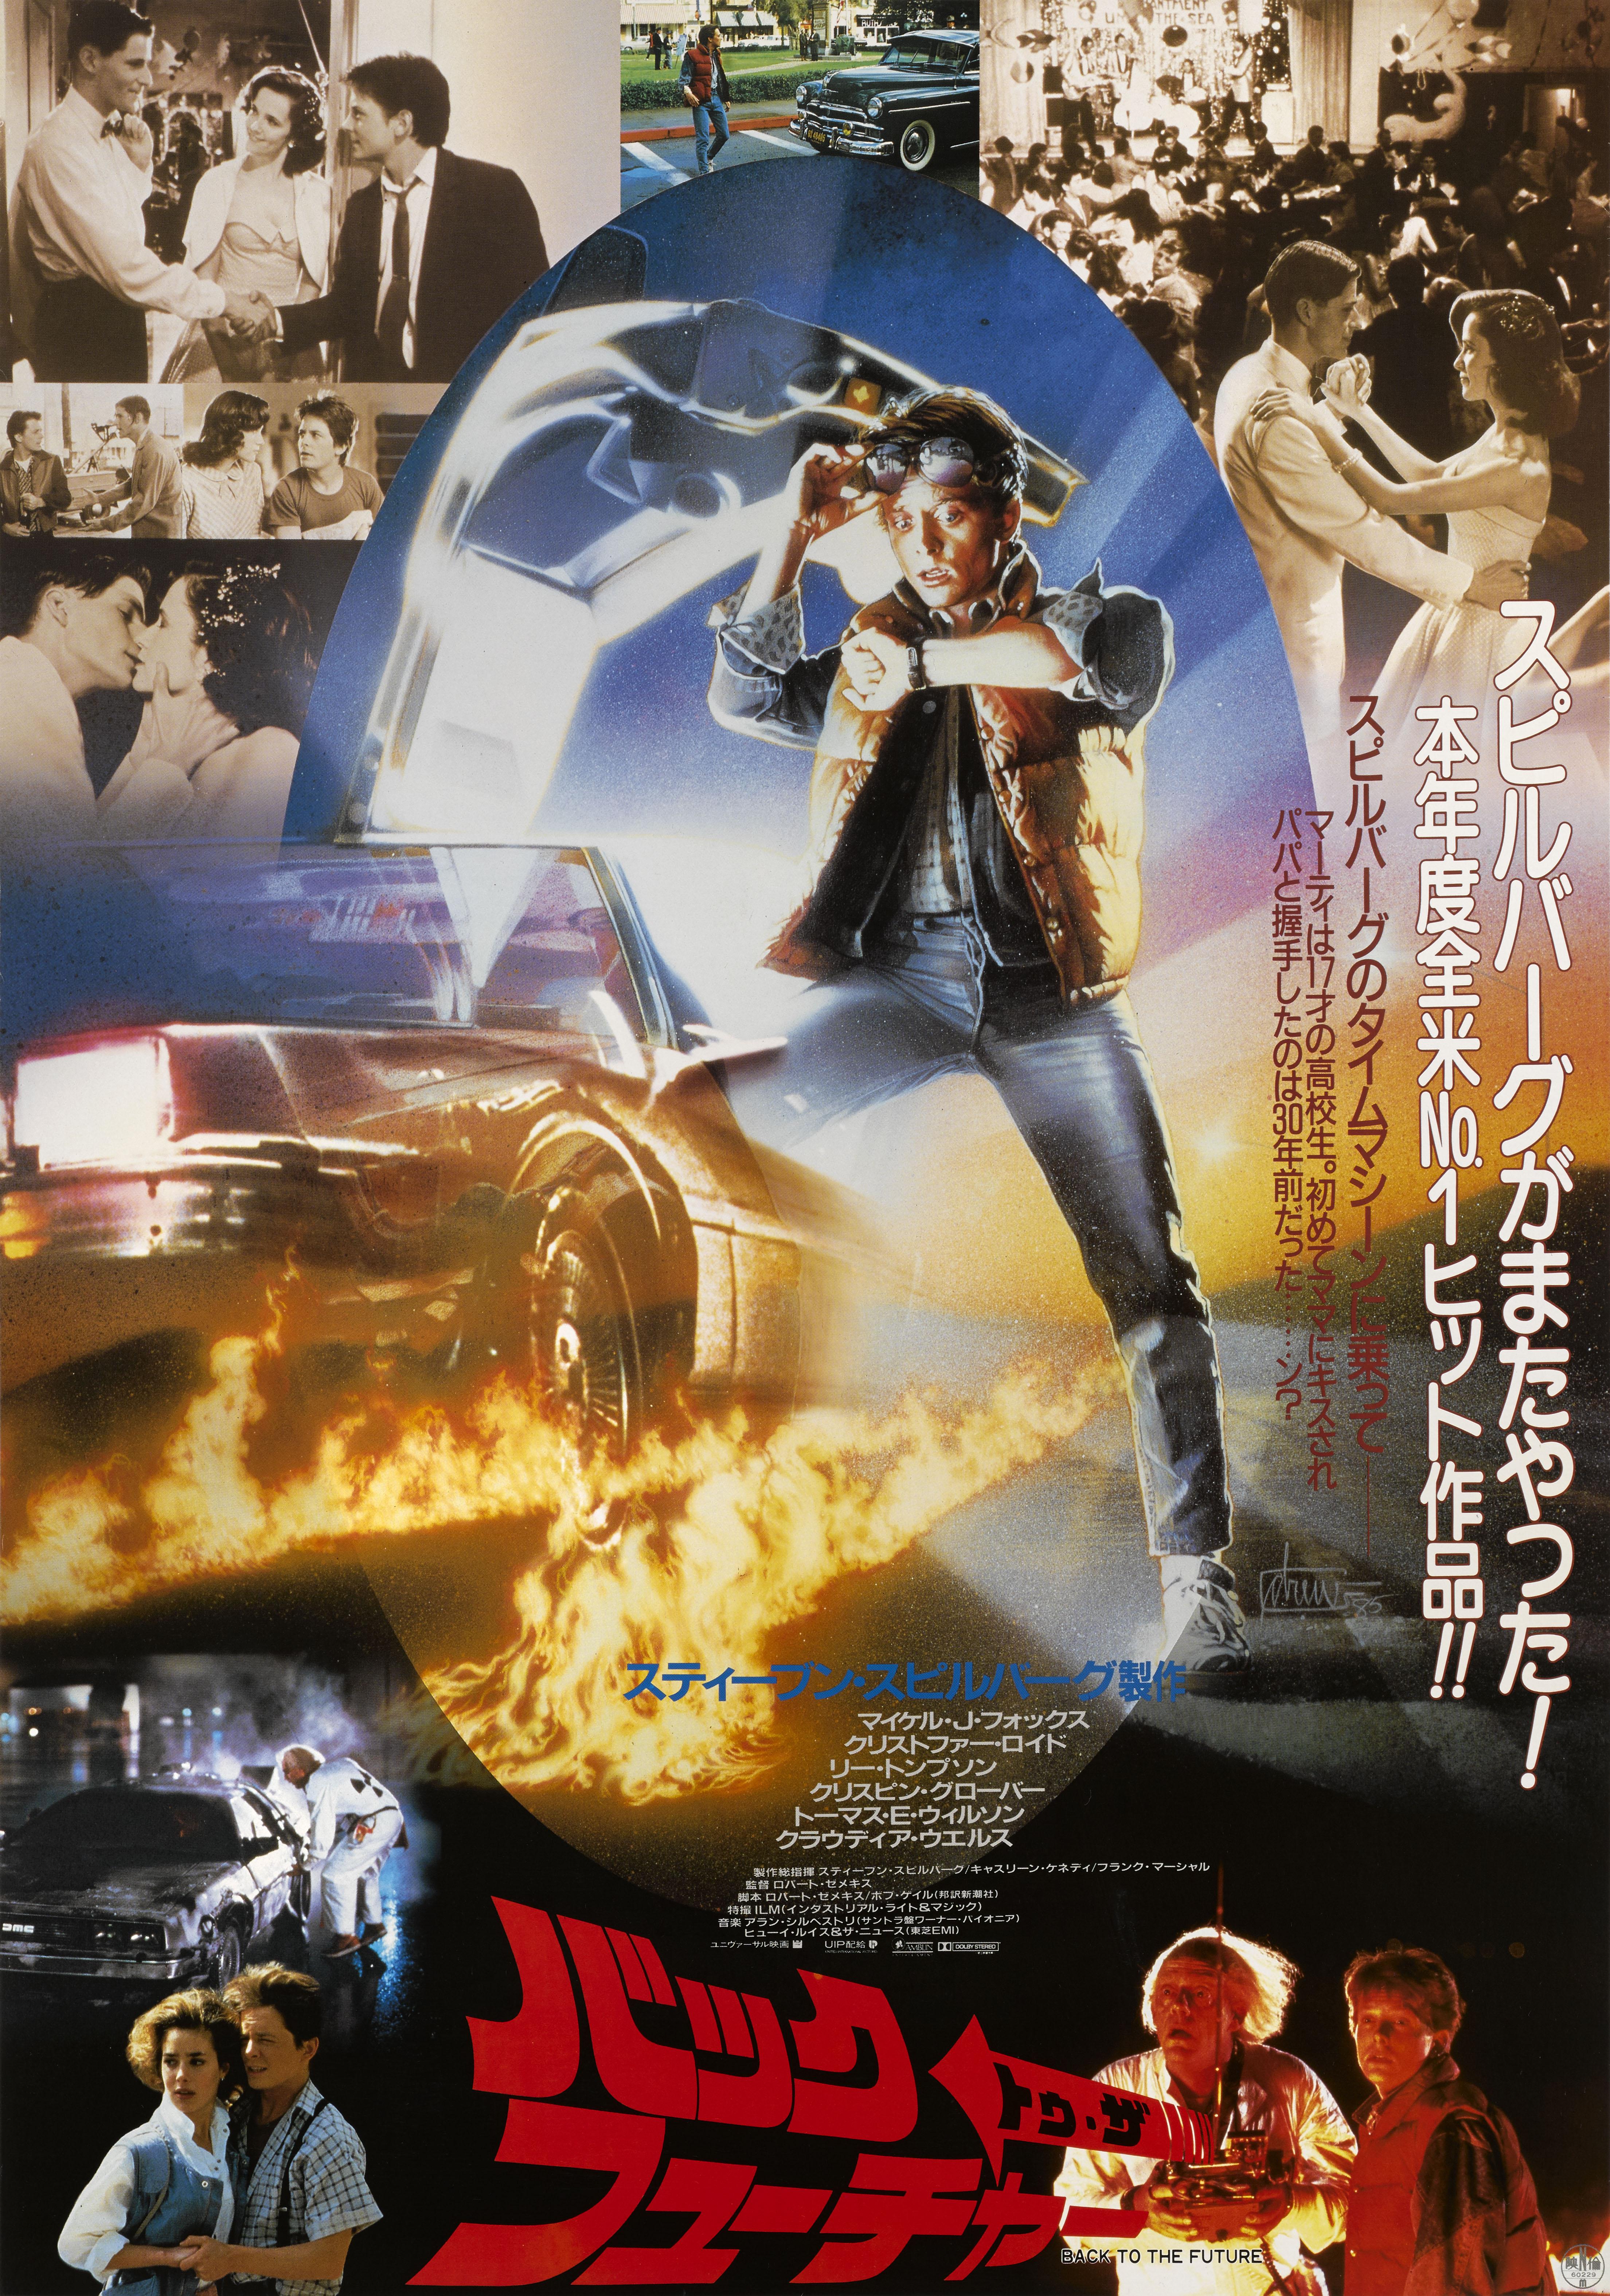 Original Japanese film poster for the 1985 cult classic directed by Robert Zemeckis and staring Michael J. Fox, Christopher Lloyd.
This poster is unfolded and linen backed in near mint condition.
It would be shipped rolled in a strong tube by